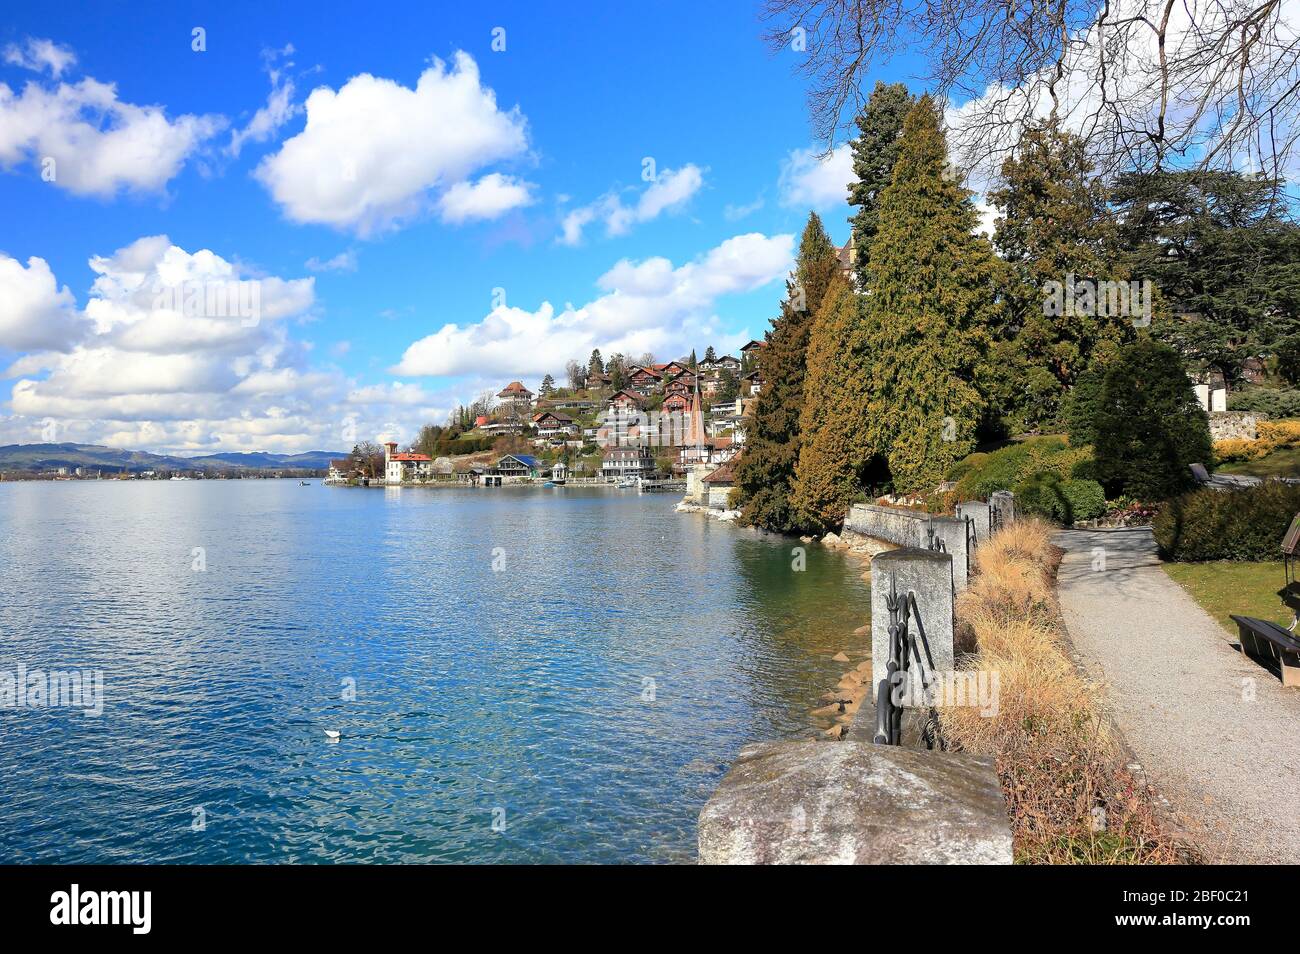 Oberhofen am Thunersee. The town is located on the northern shore of Lake Thun. Switzerland, Europe. Stock Photo